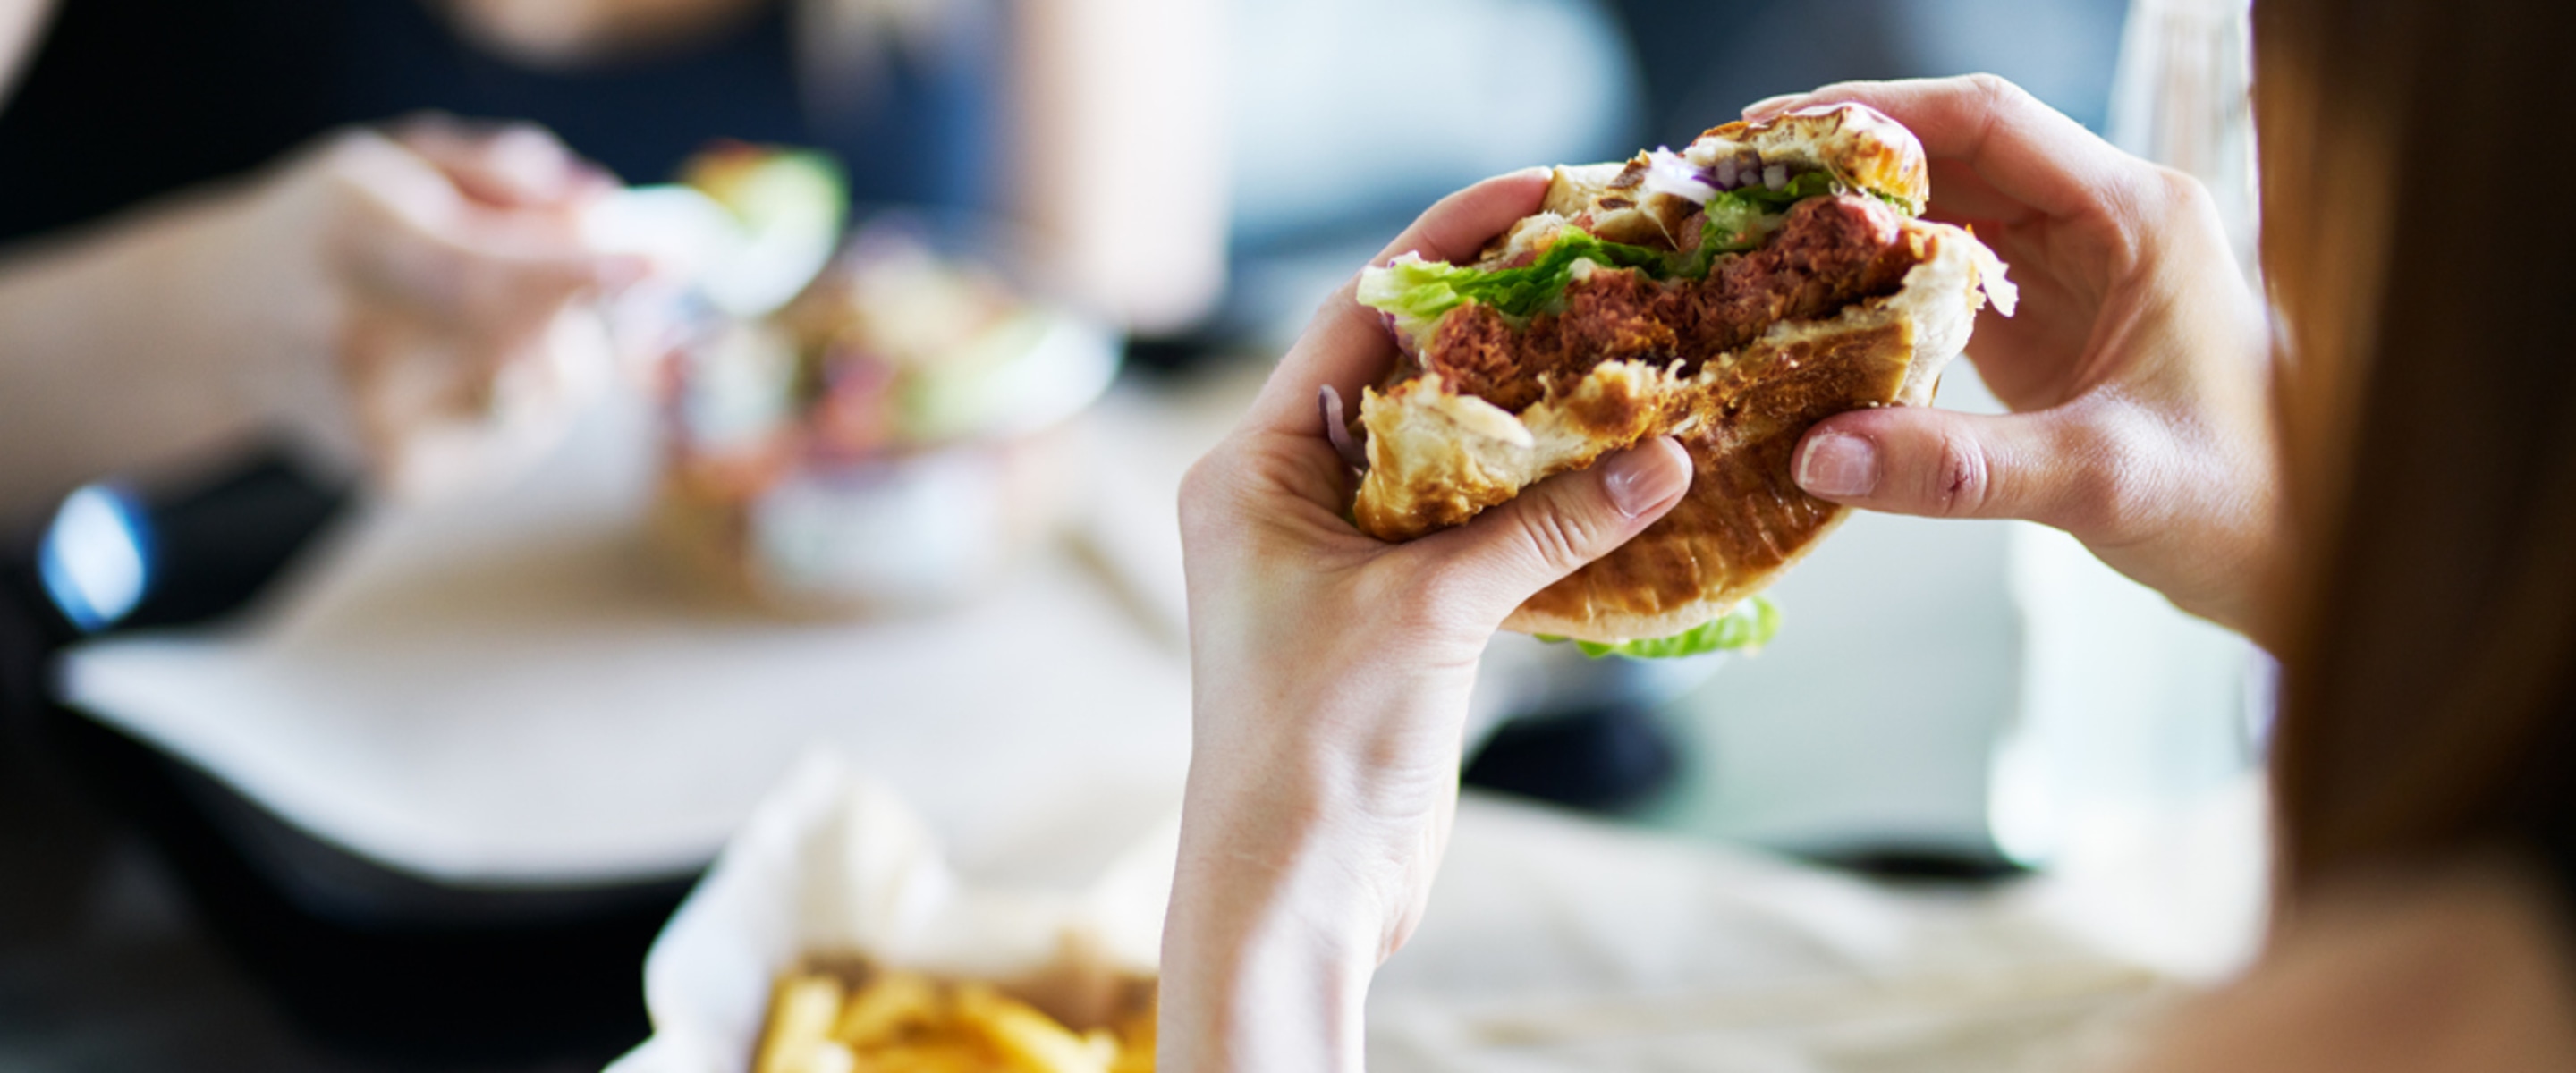 Veganuary, Fast Food, and Gen Z: Why the UK Is So Vegan-Friendly Right Now